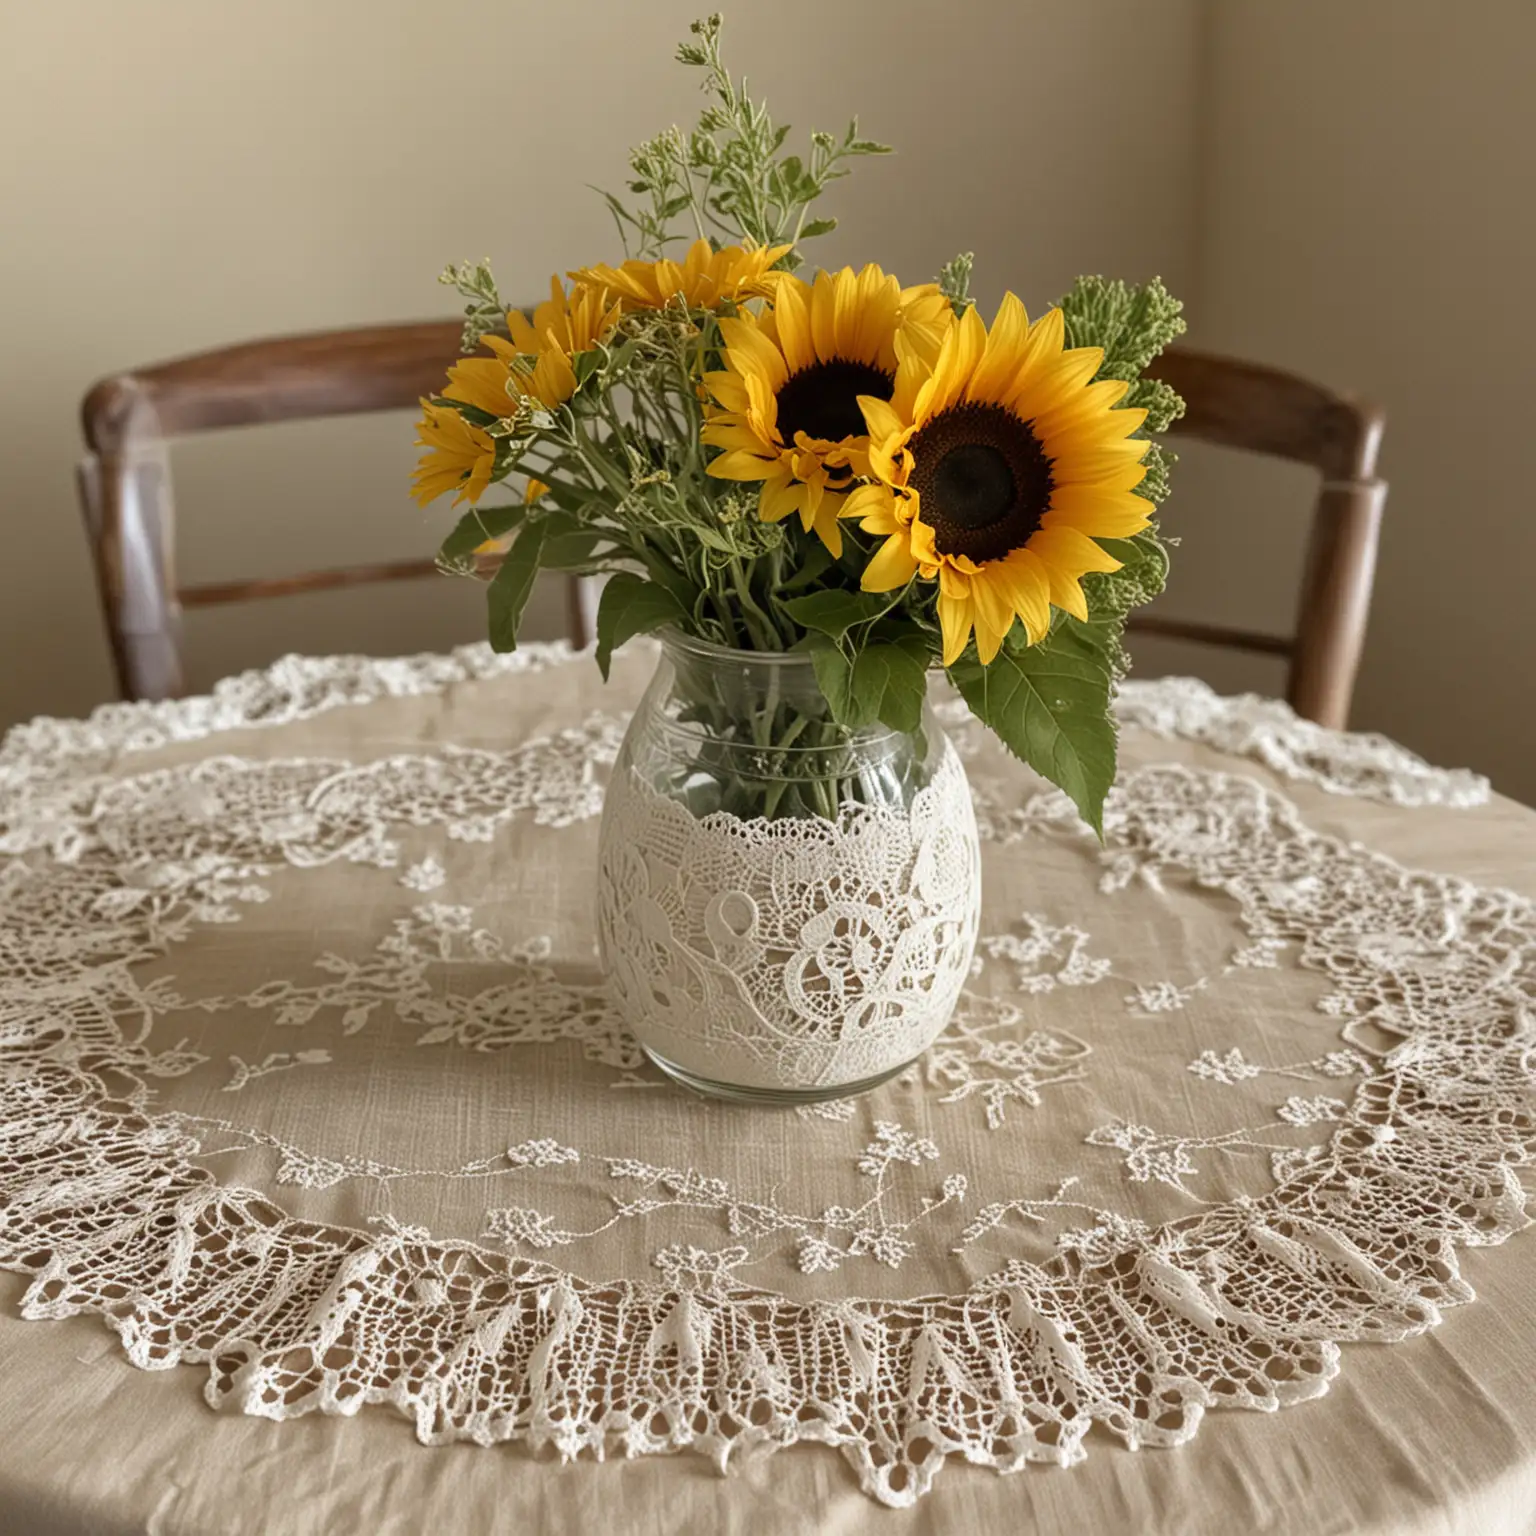 small and simple vintage centerpiece with antique vase setting on a vintage lace placement with sunflowers